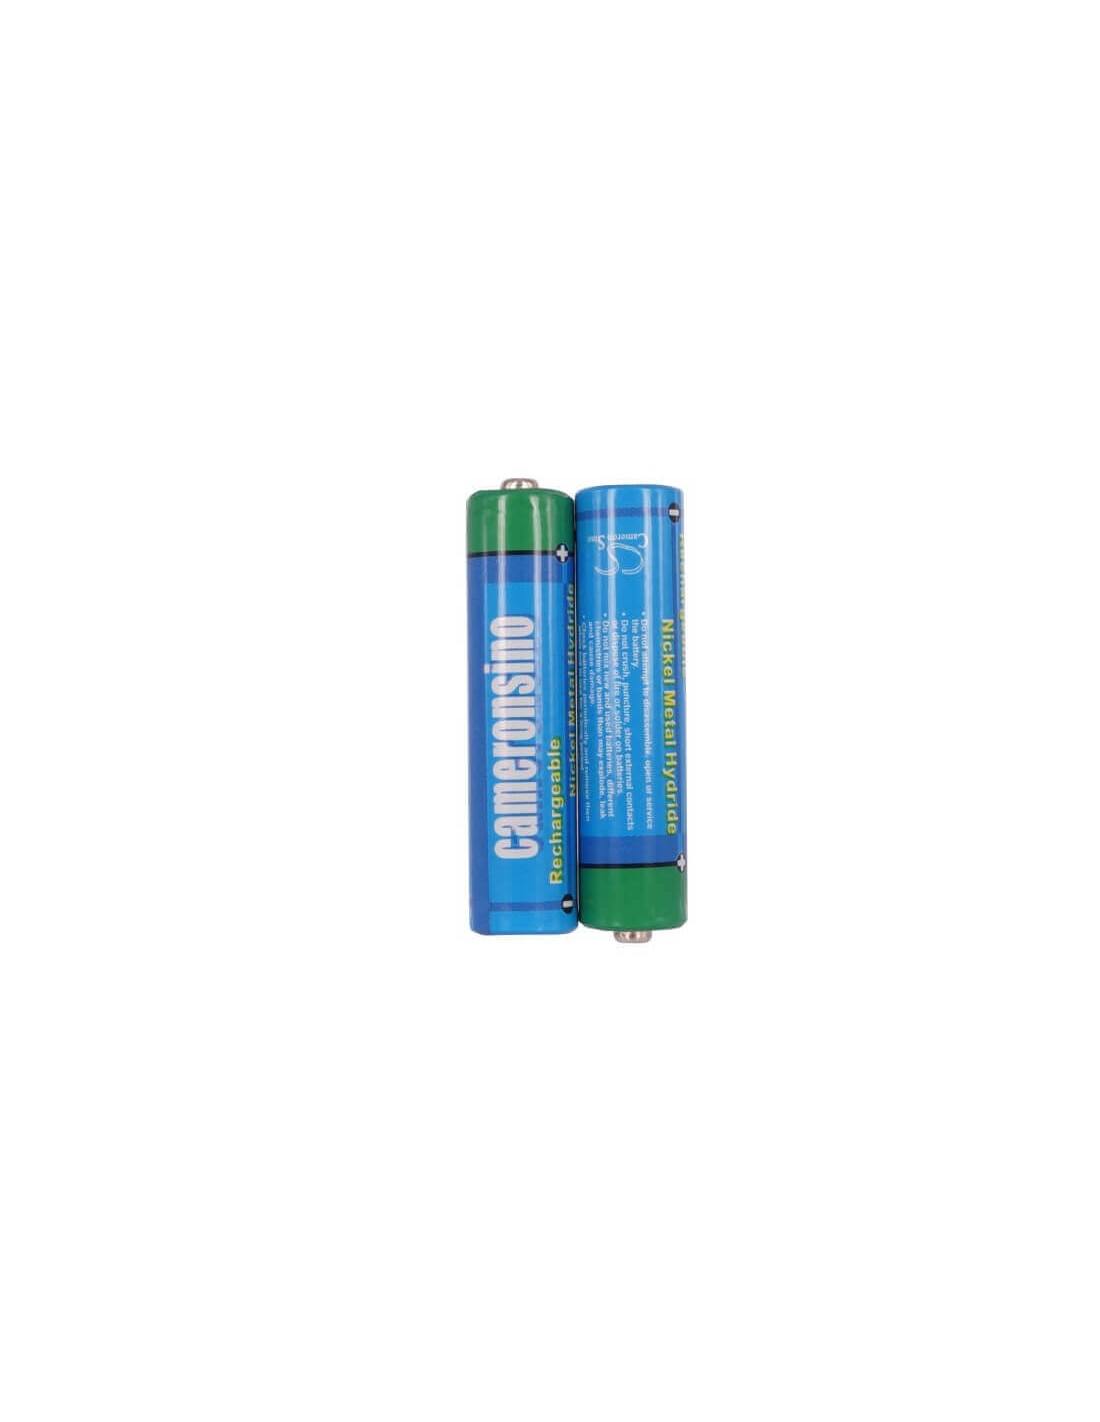 Battery for Cameron Sino, Aaa, Am4, Hr03 1.2V, 800mAh - 0.96Wh